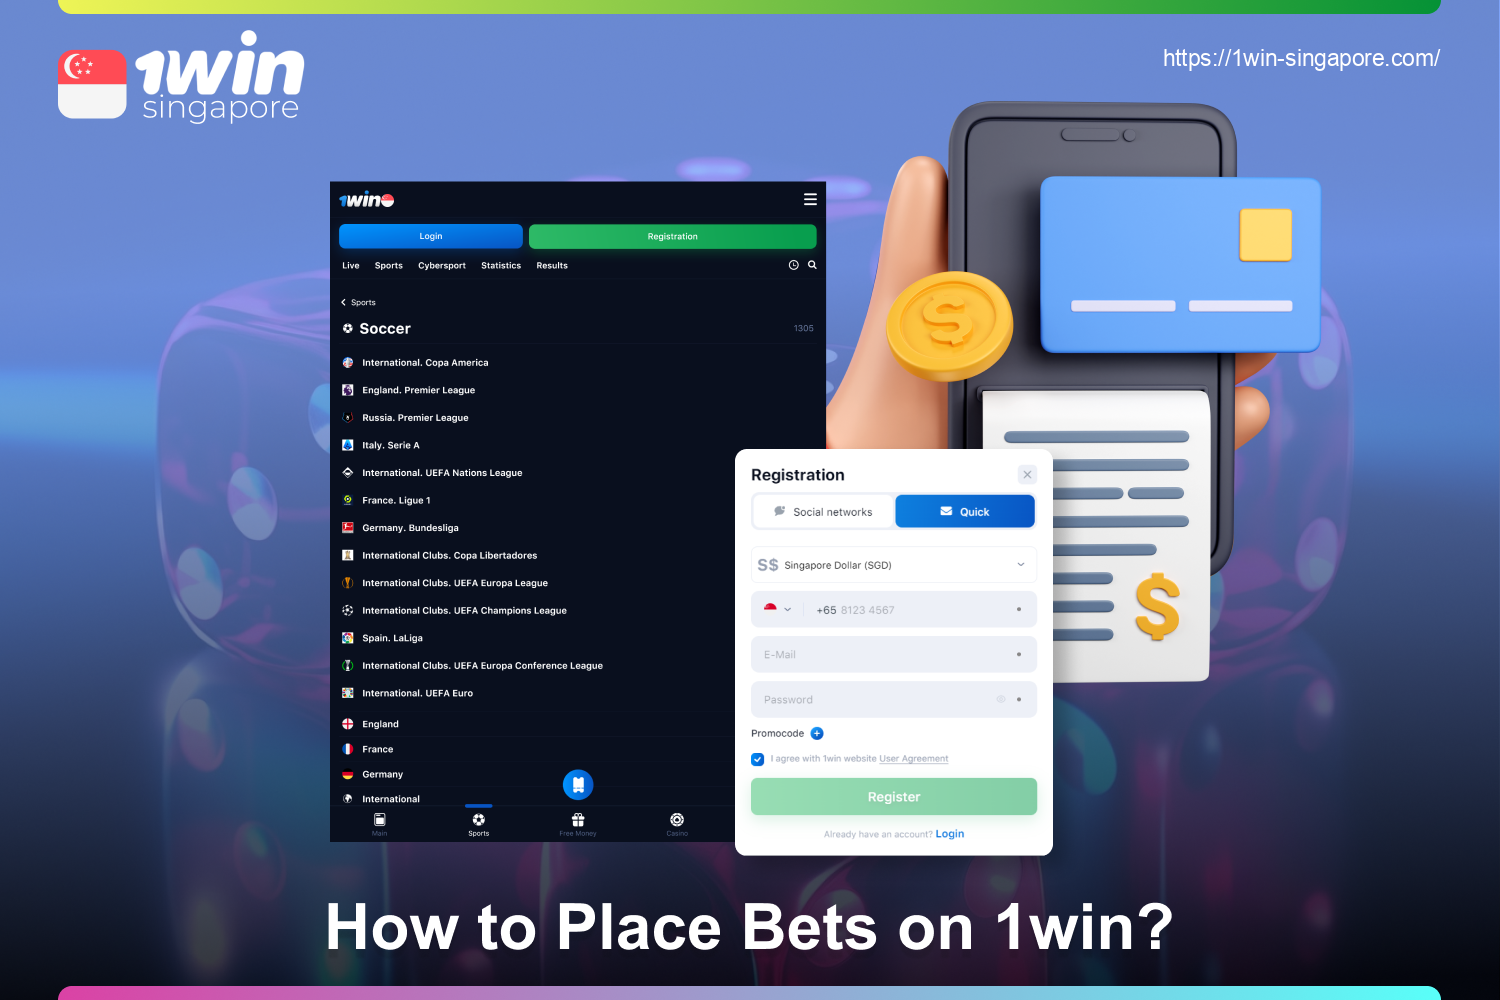 To start betting at 1win, players from Singapore must log in to their account, make a deposit, select a sporting event and betting market